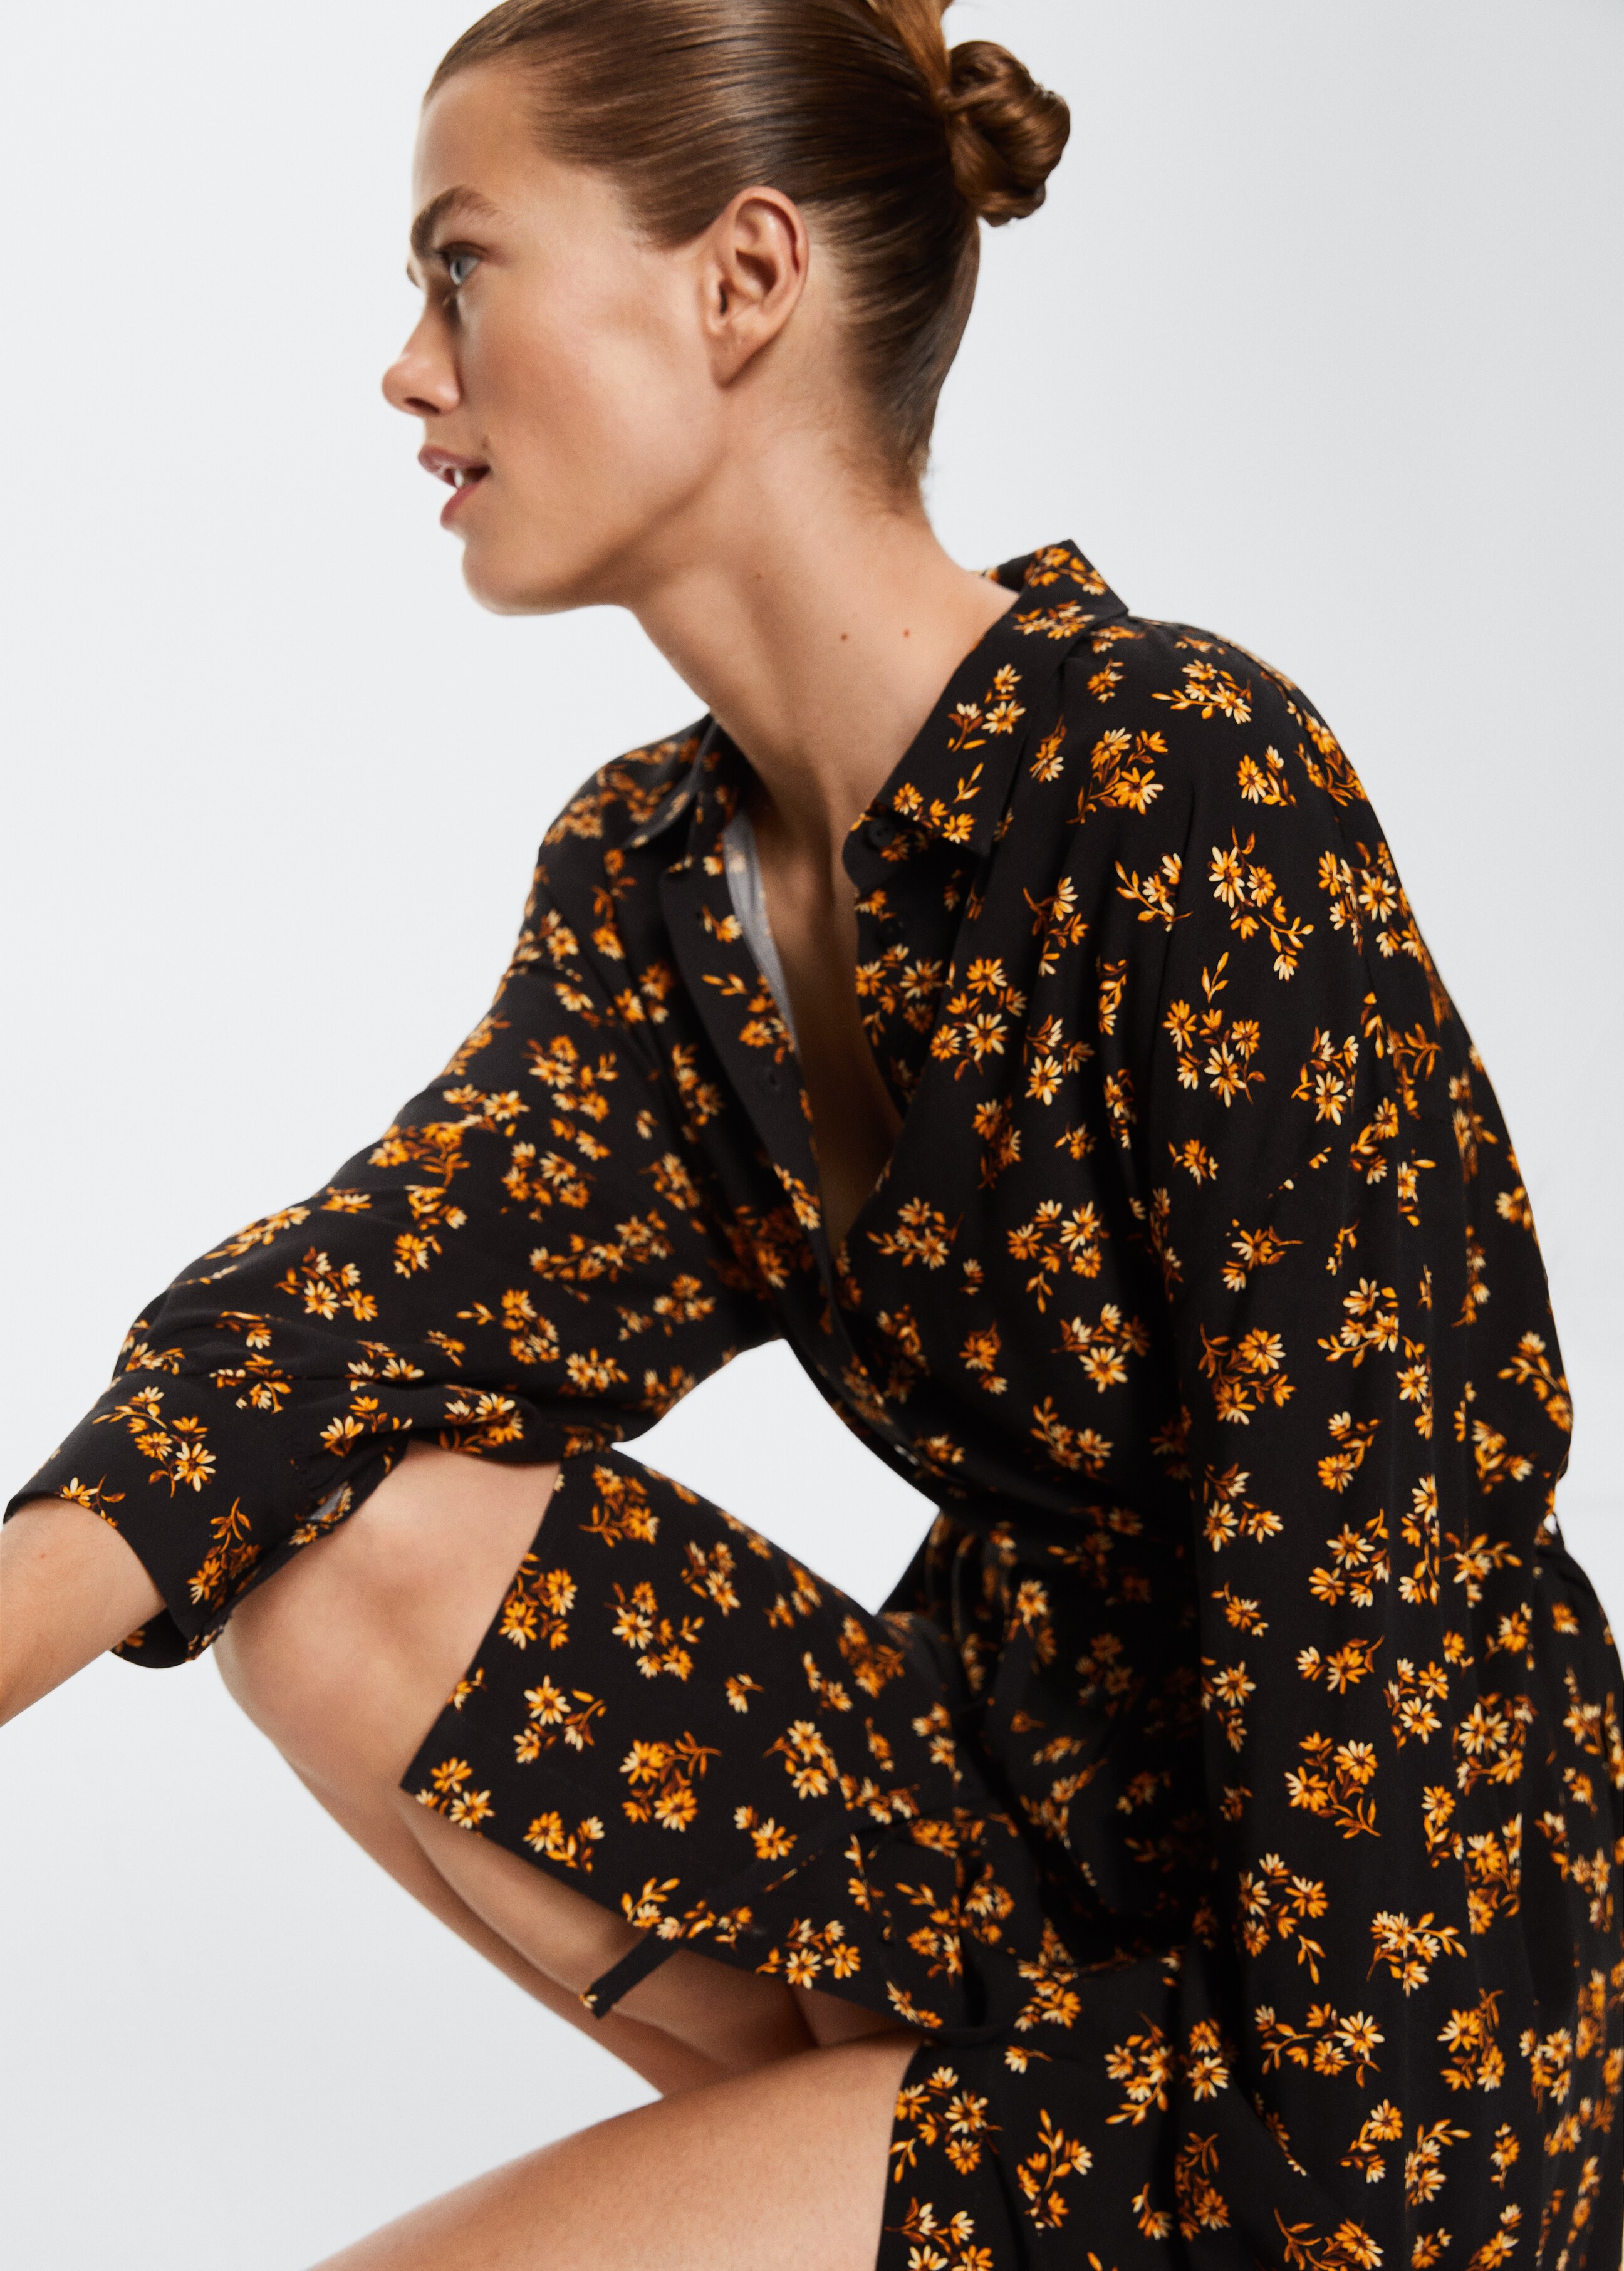 Printed shirt dress - Details of the article 2